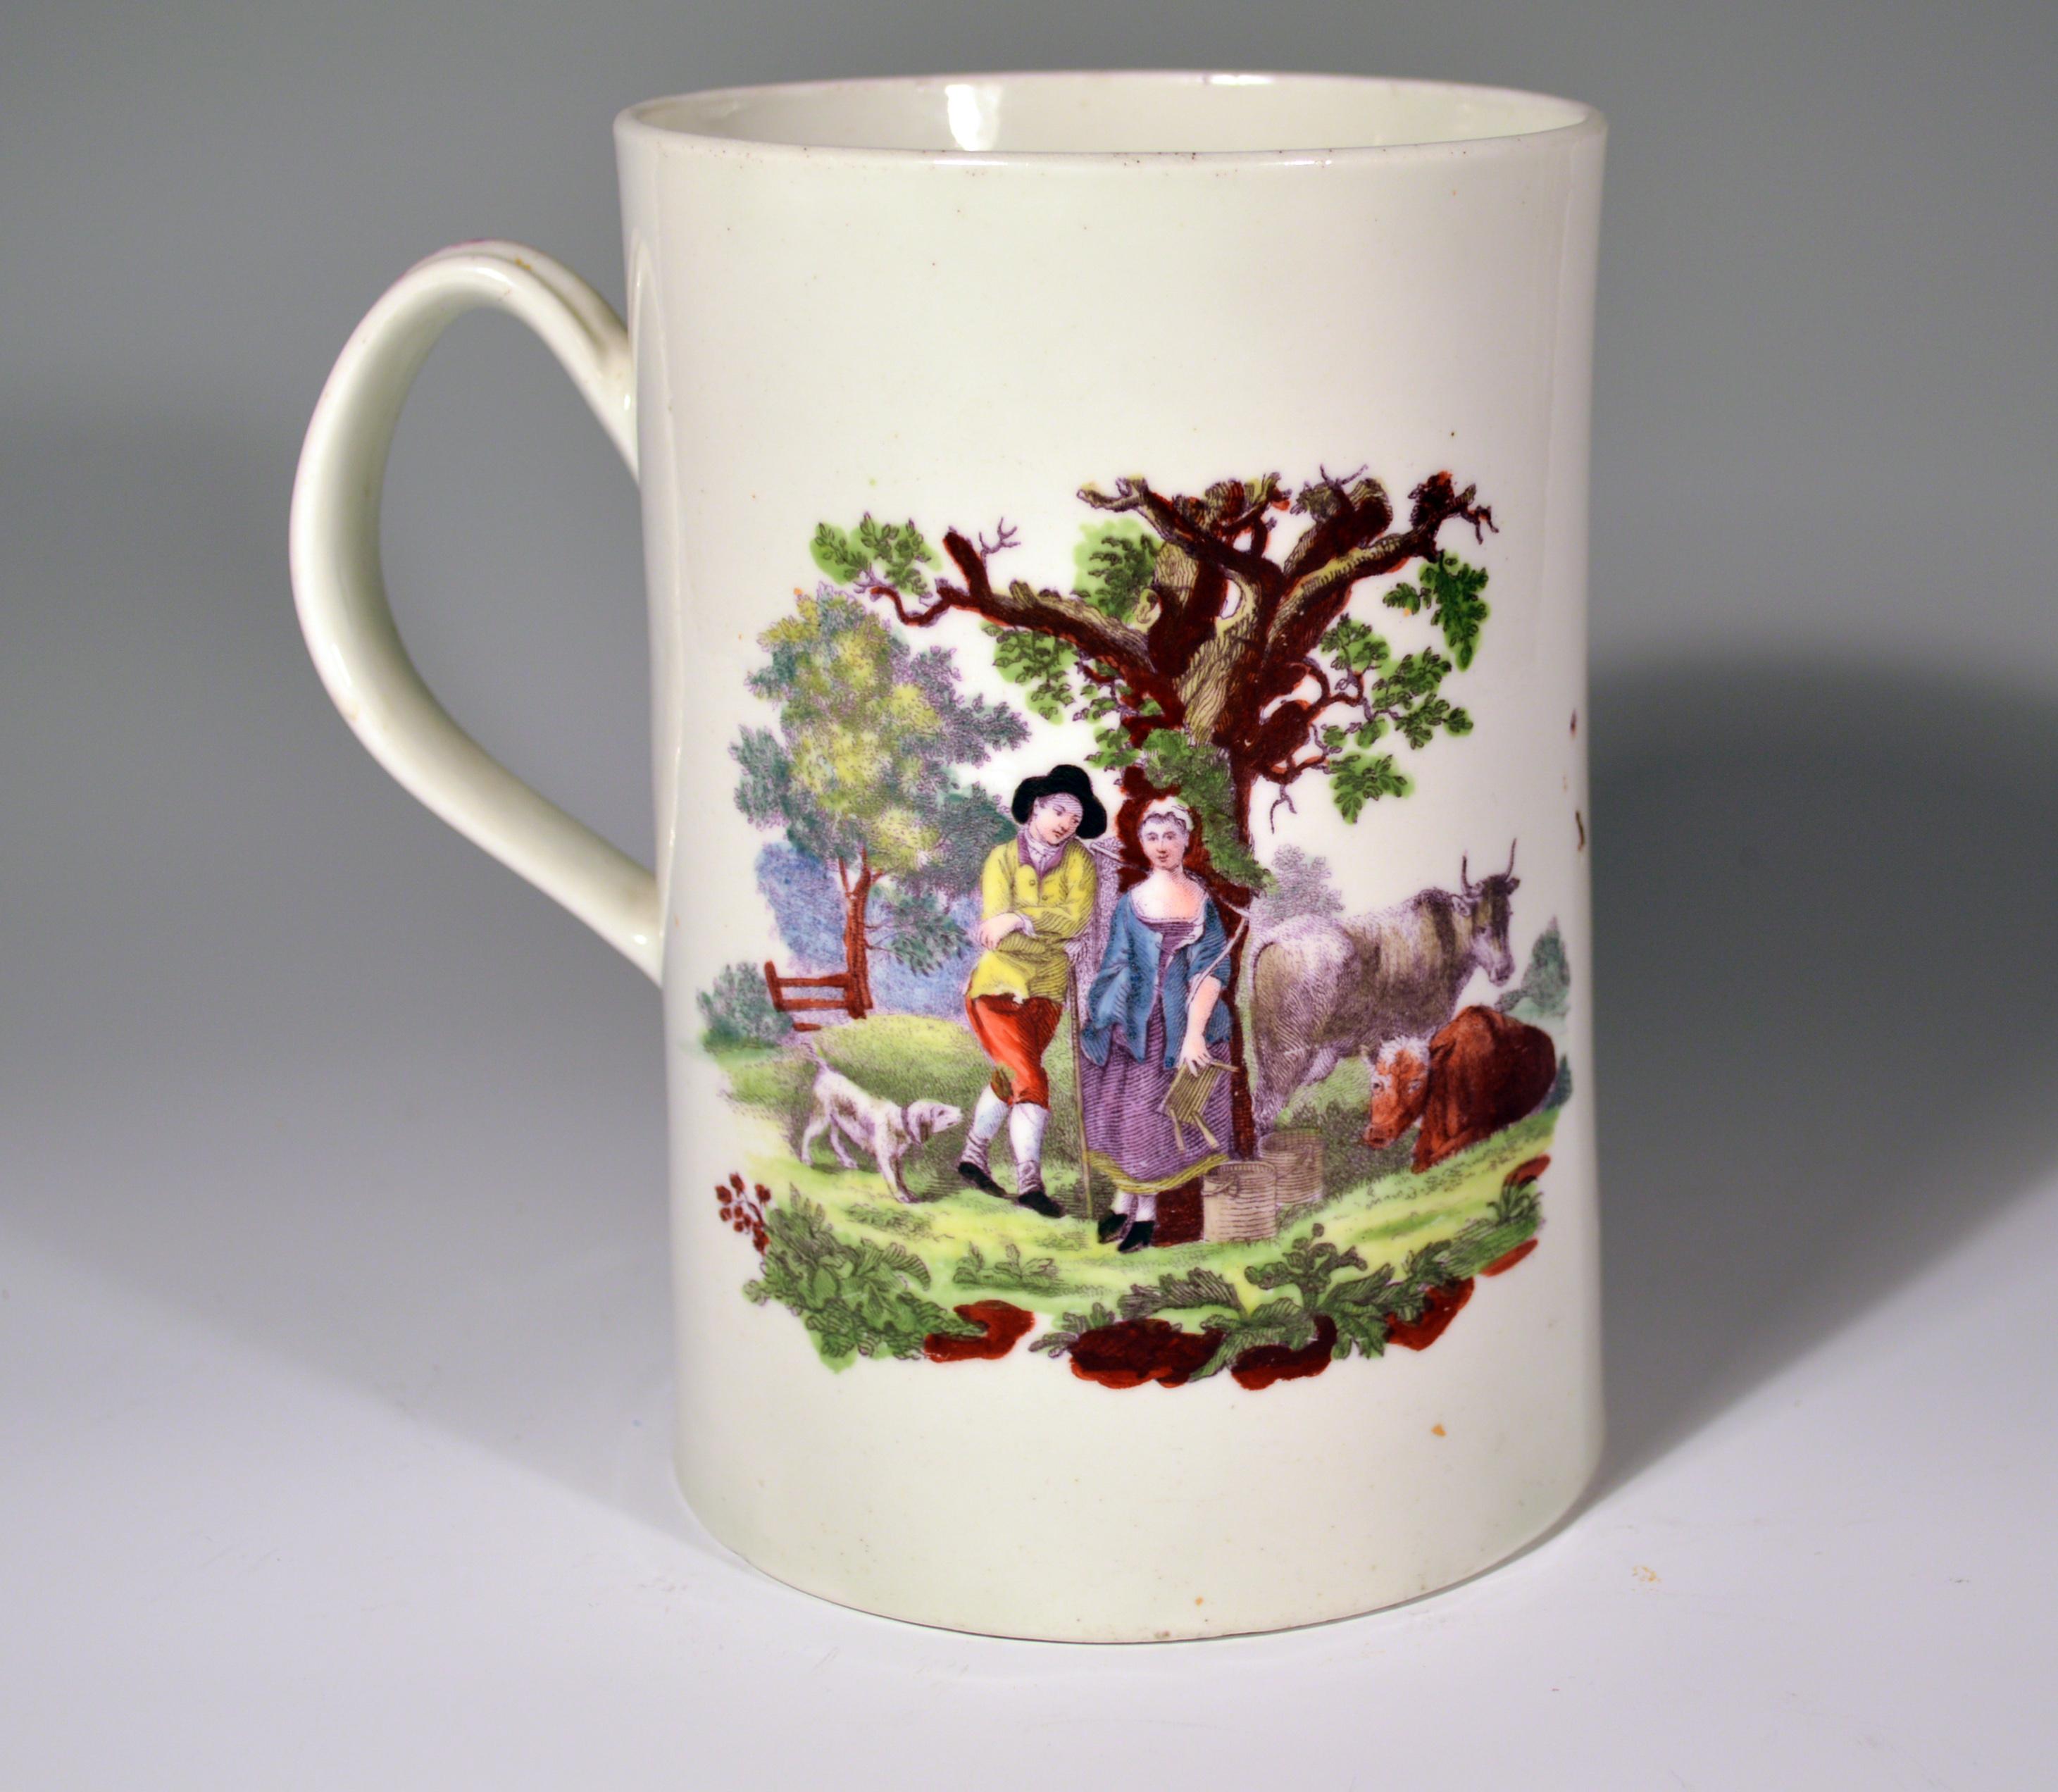 First Period Worcester polychrome porcelain tankard decorated with the milking scene (No.1) and rural lovers on the reverse,
circa 1768
(VM98322A)

The cylindrical First period Worcester tankard with flaring foot depicts two polychrome painted